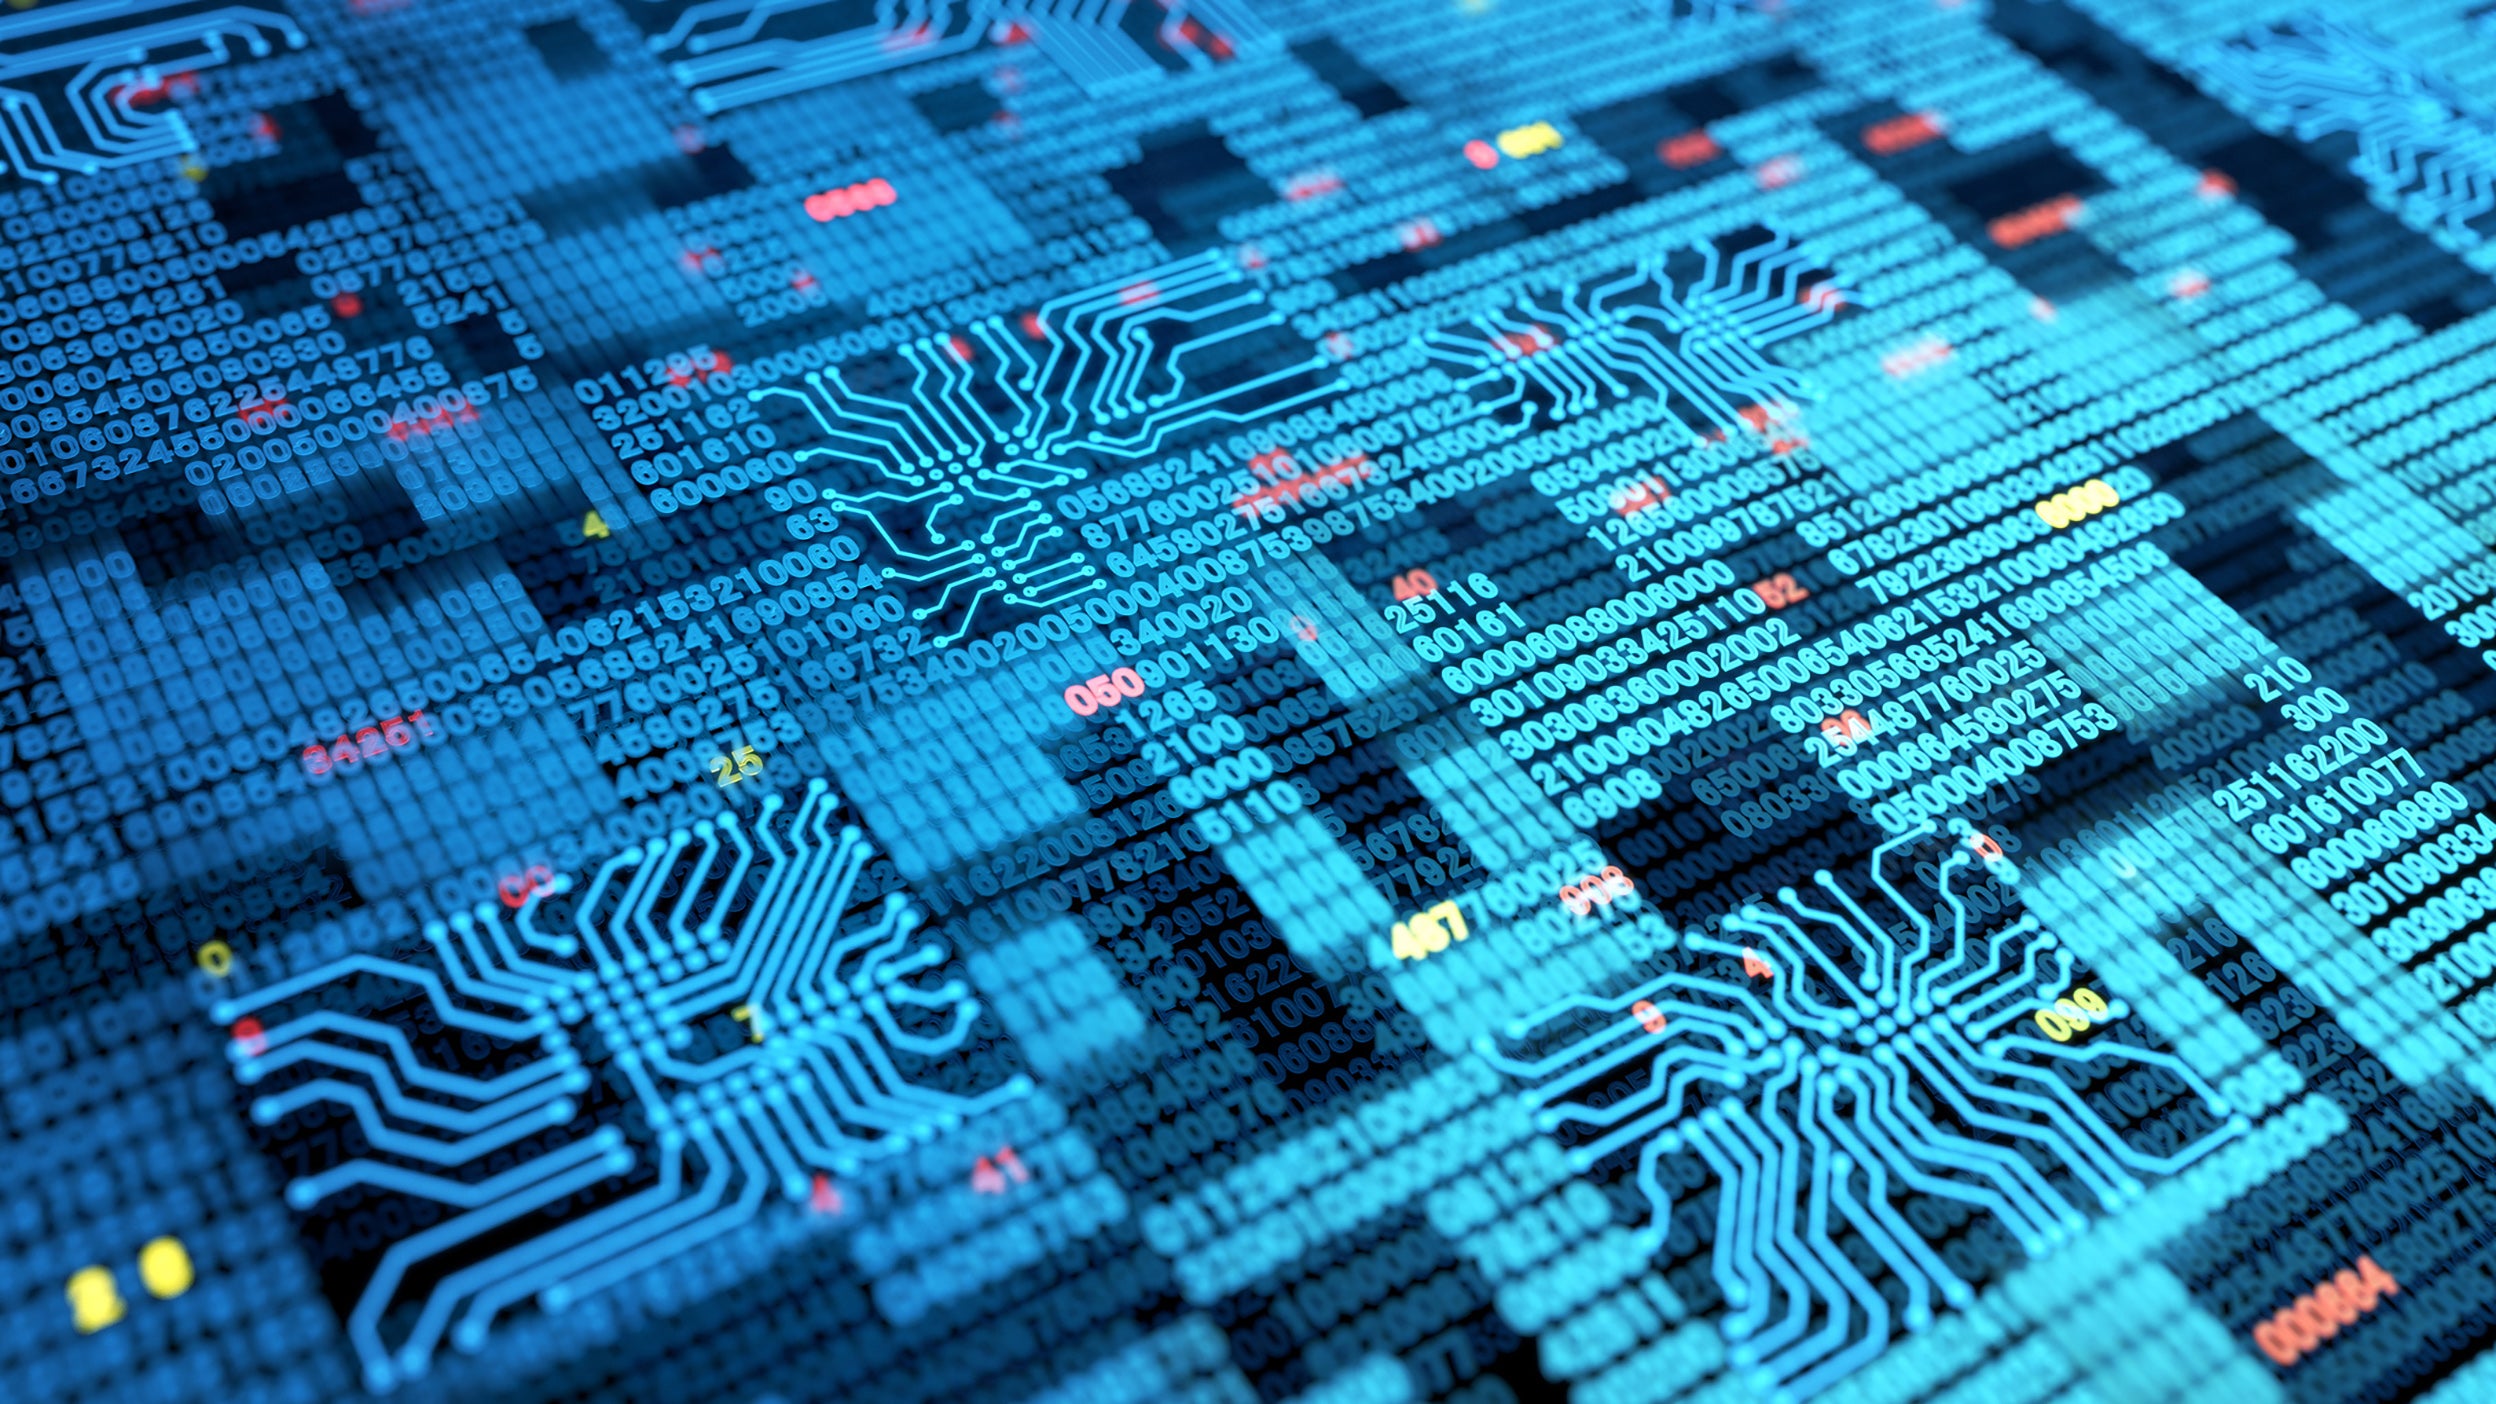 Semiconductors: An engine of innovation - Invesco QQQ ETF